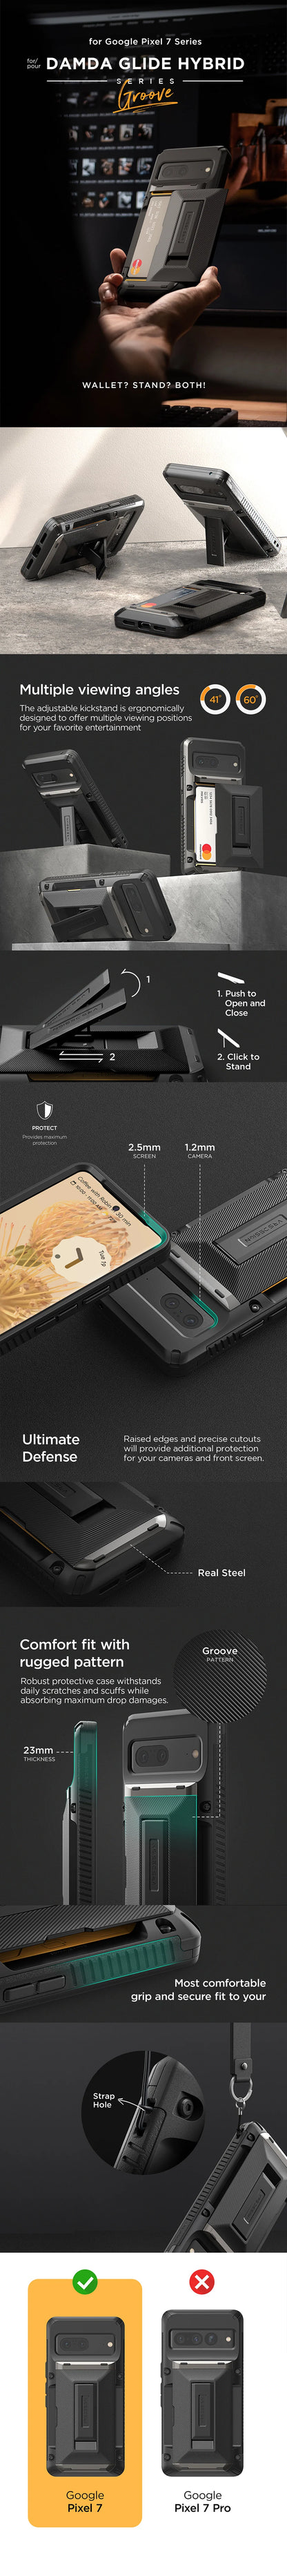 Google Pixel 7 Pro rugged Glide wallet case with multiple durable and convenient card slot with sleek minimalist look by VRS